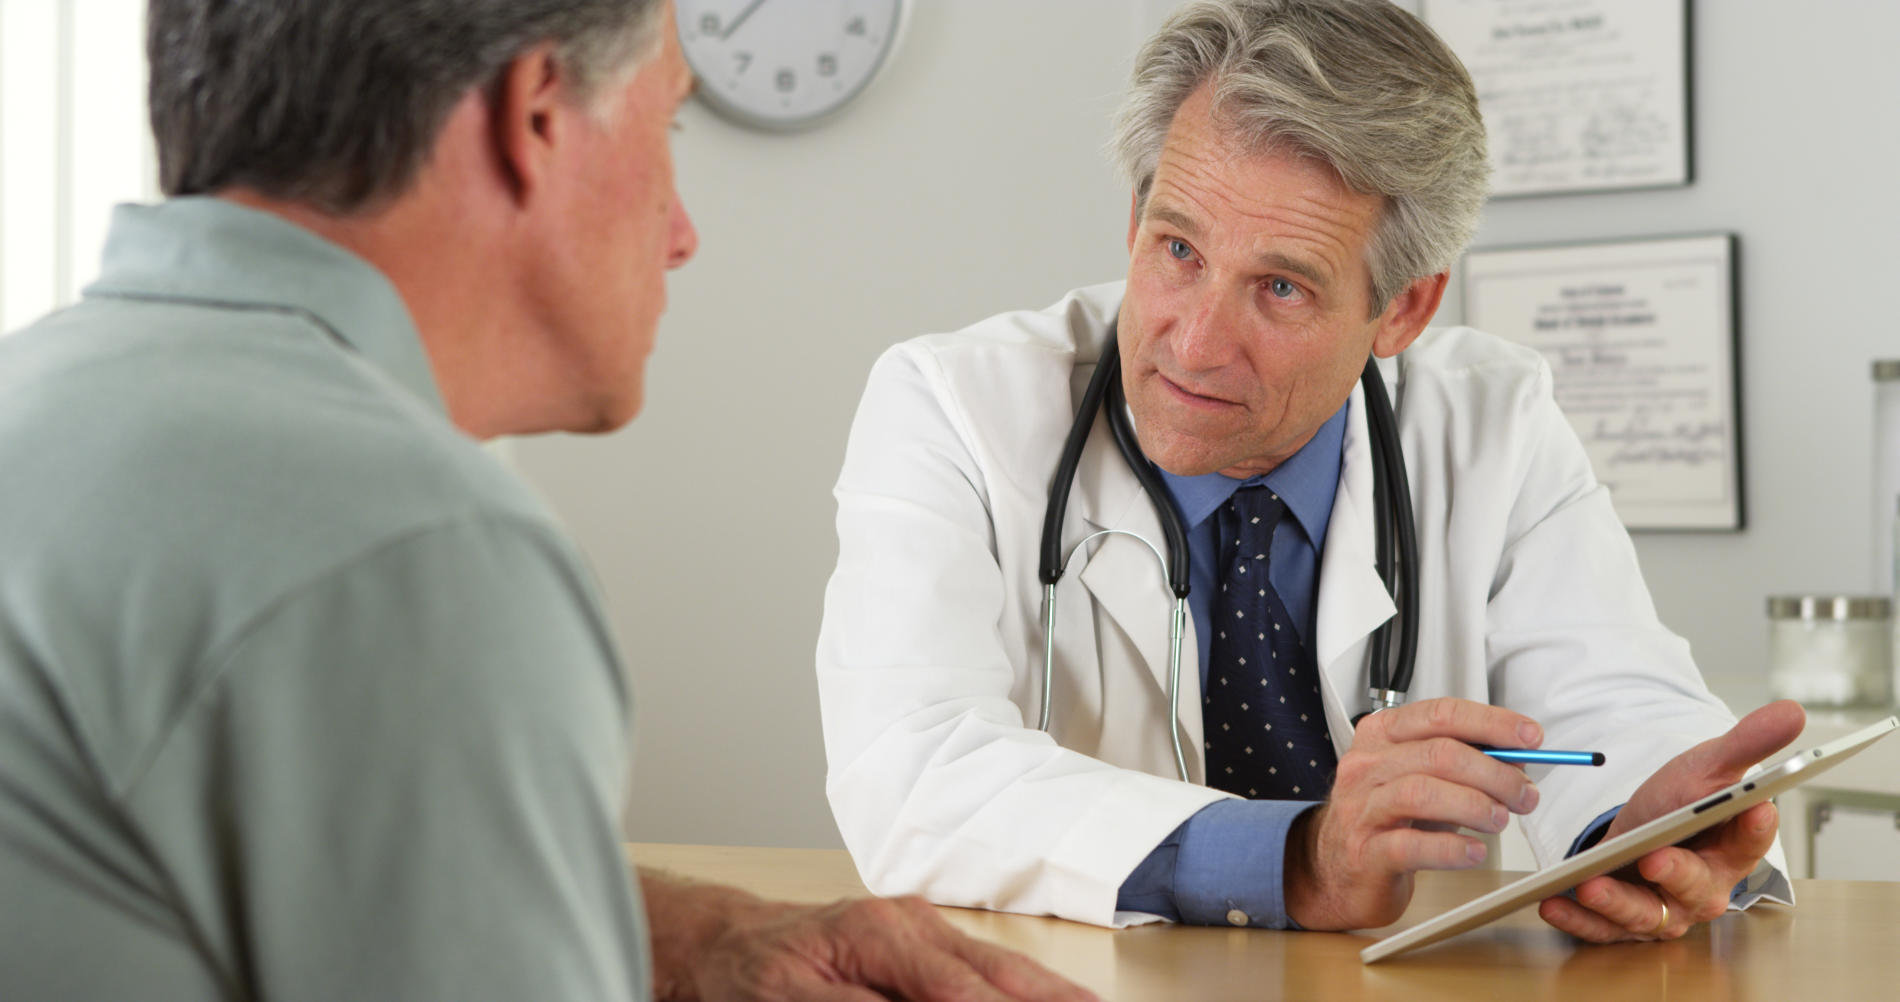 Doctor speaking to man about prostate cancer treatment options.